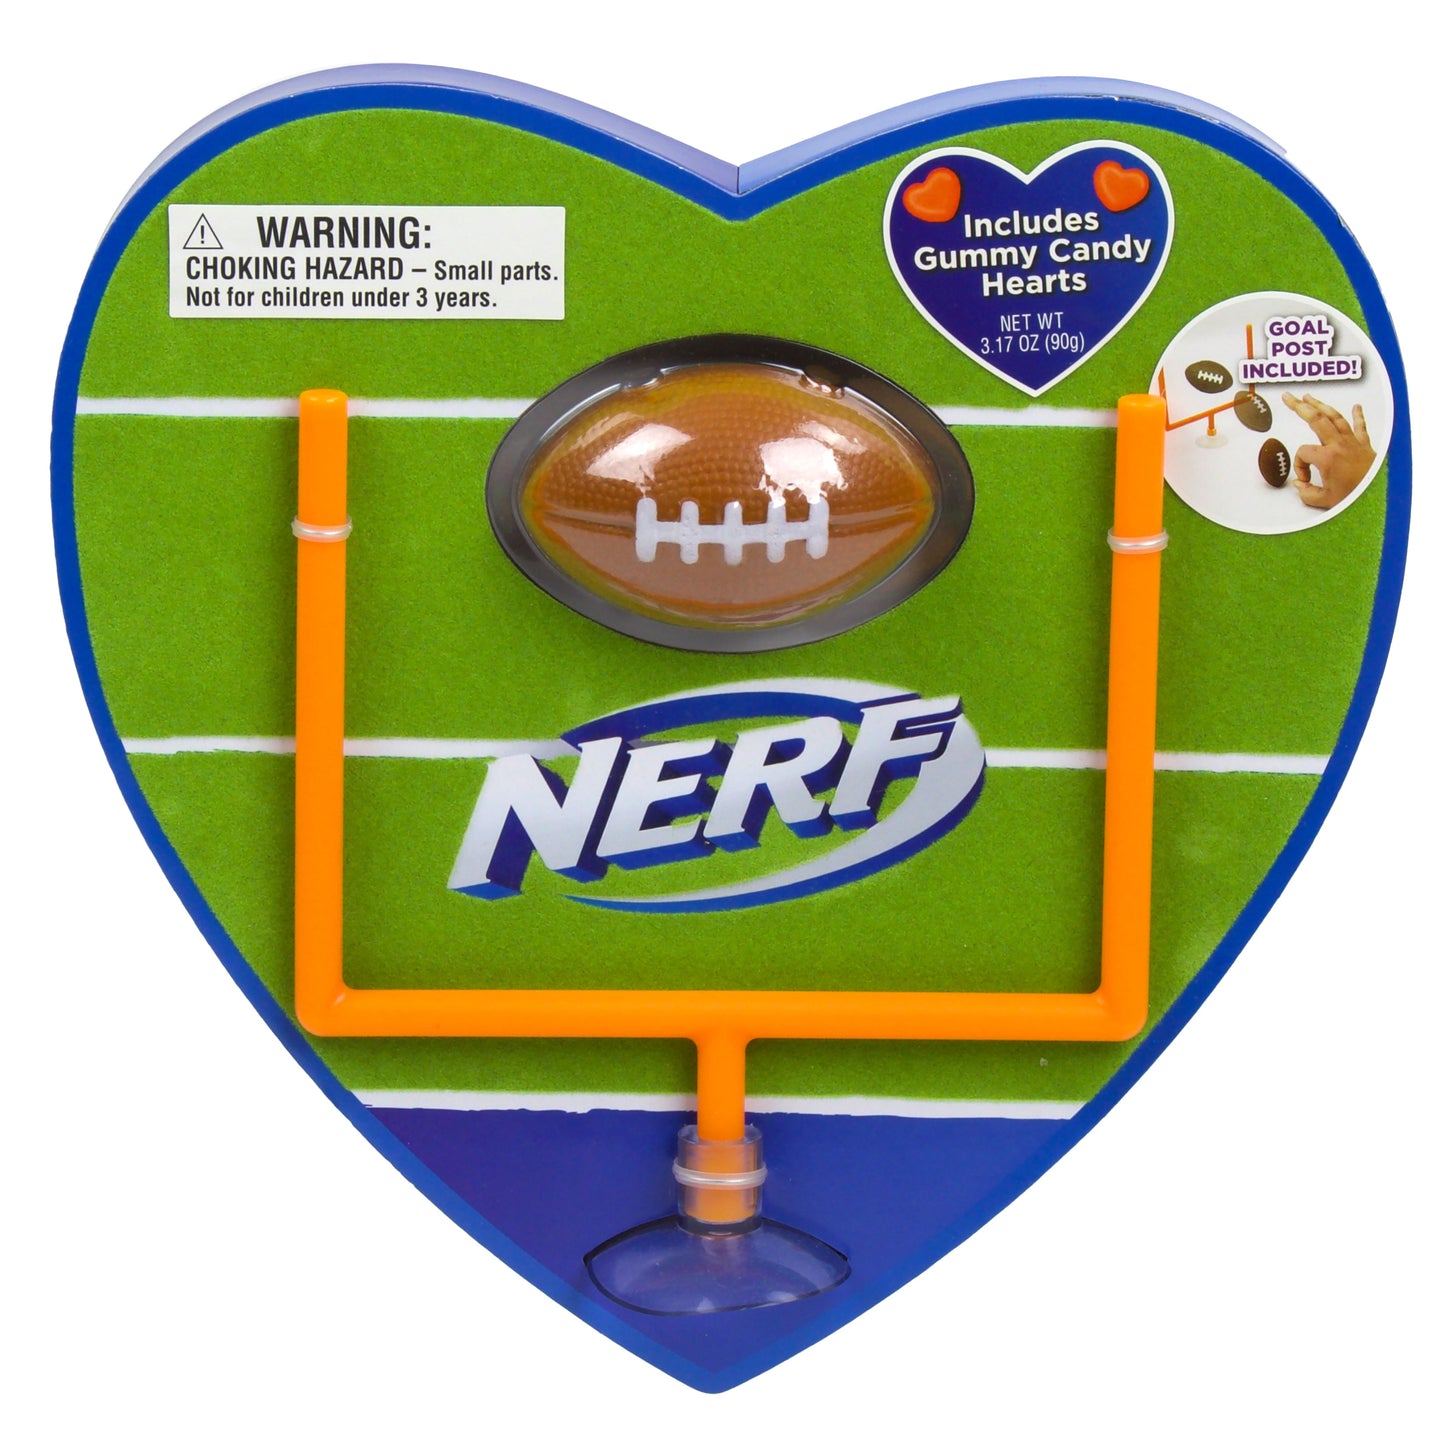 Green and blue heart shaped box with field print cover and orange toy goal post and brown toy football 